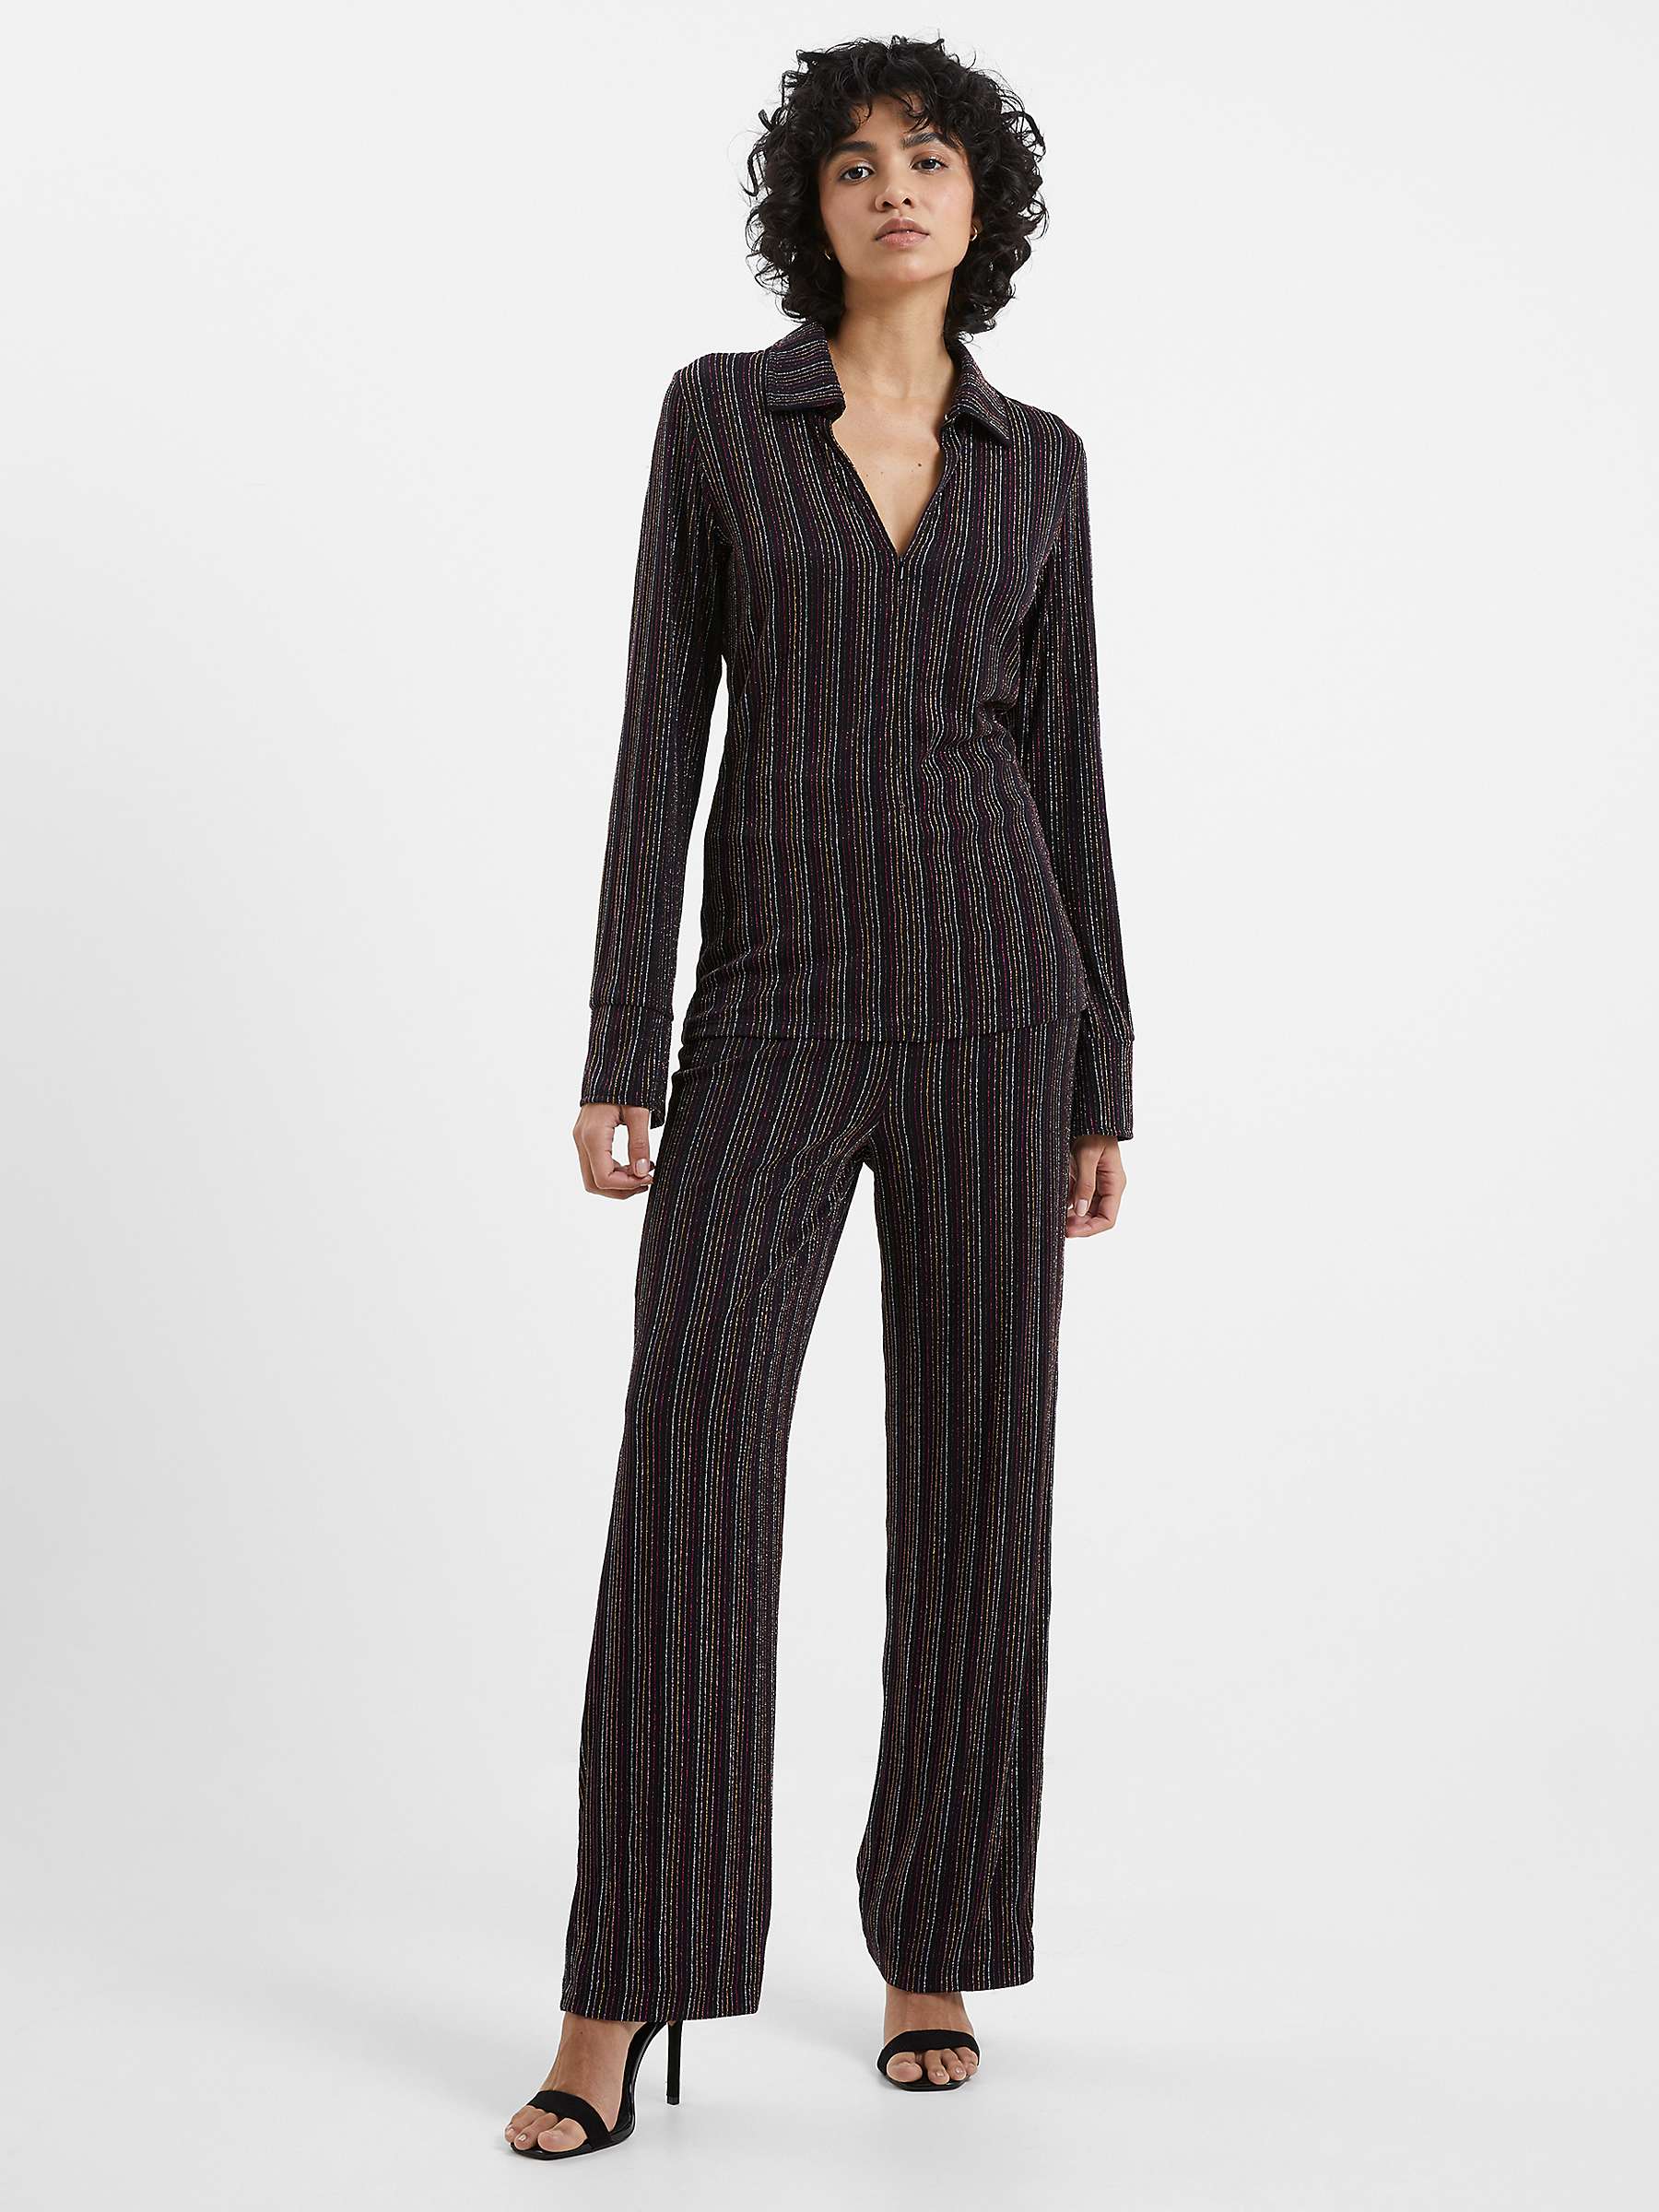 Buy French Connection Paula Trousers, Multi Online at johnlewis.com